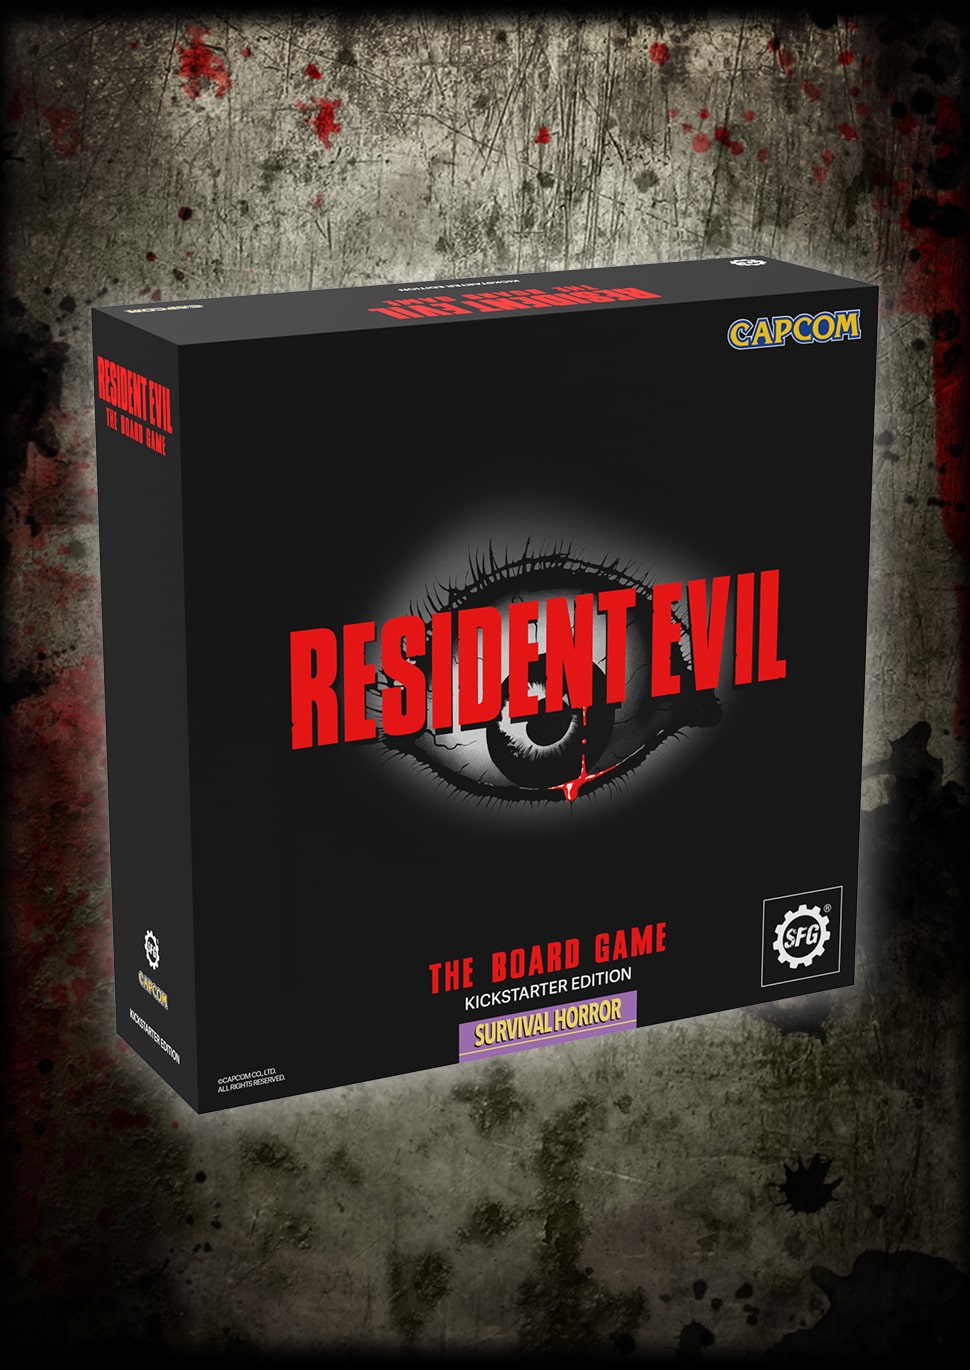 First Look! Pledge Levels, Exclusives, Free Gift & More | Resident Evil: The Board Game